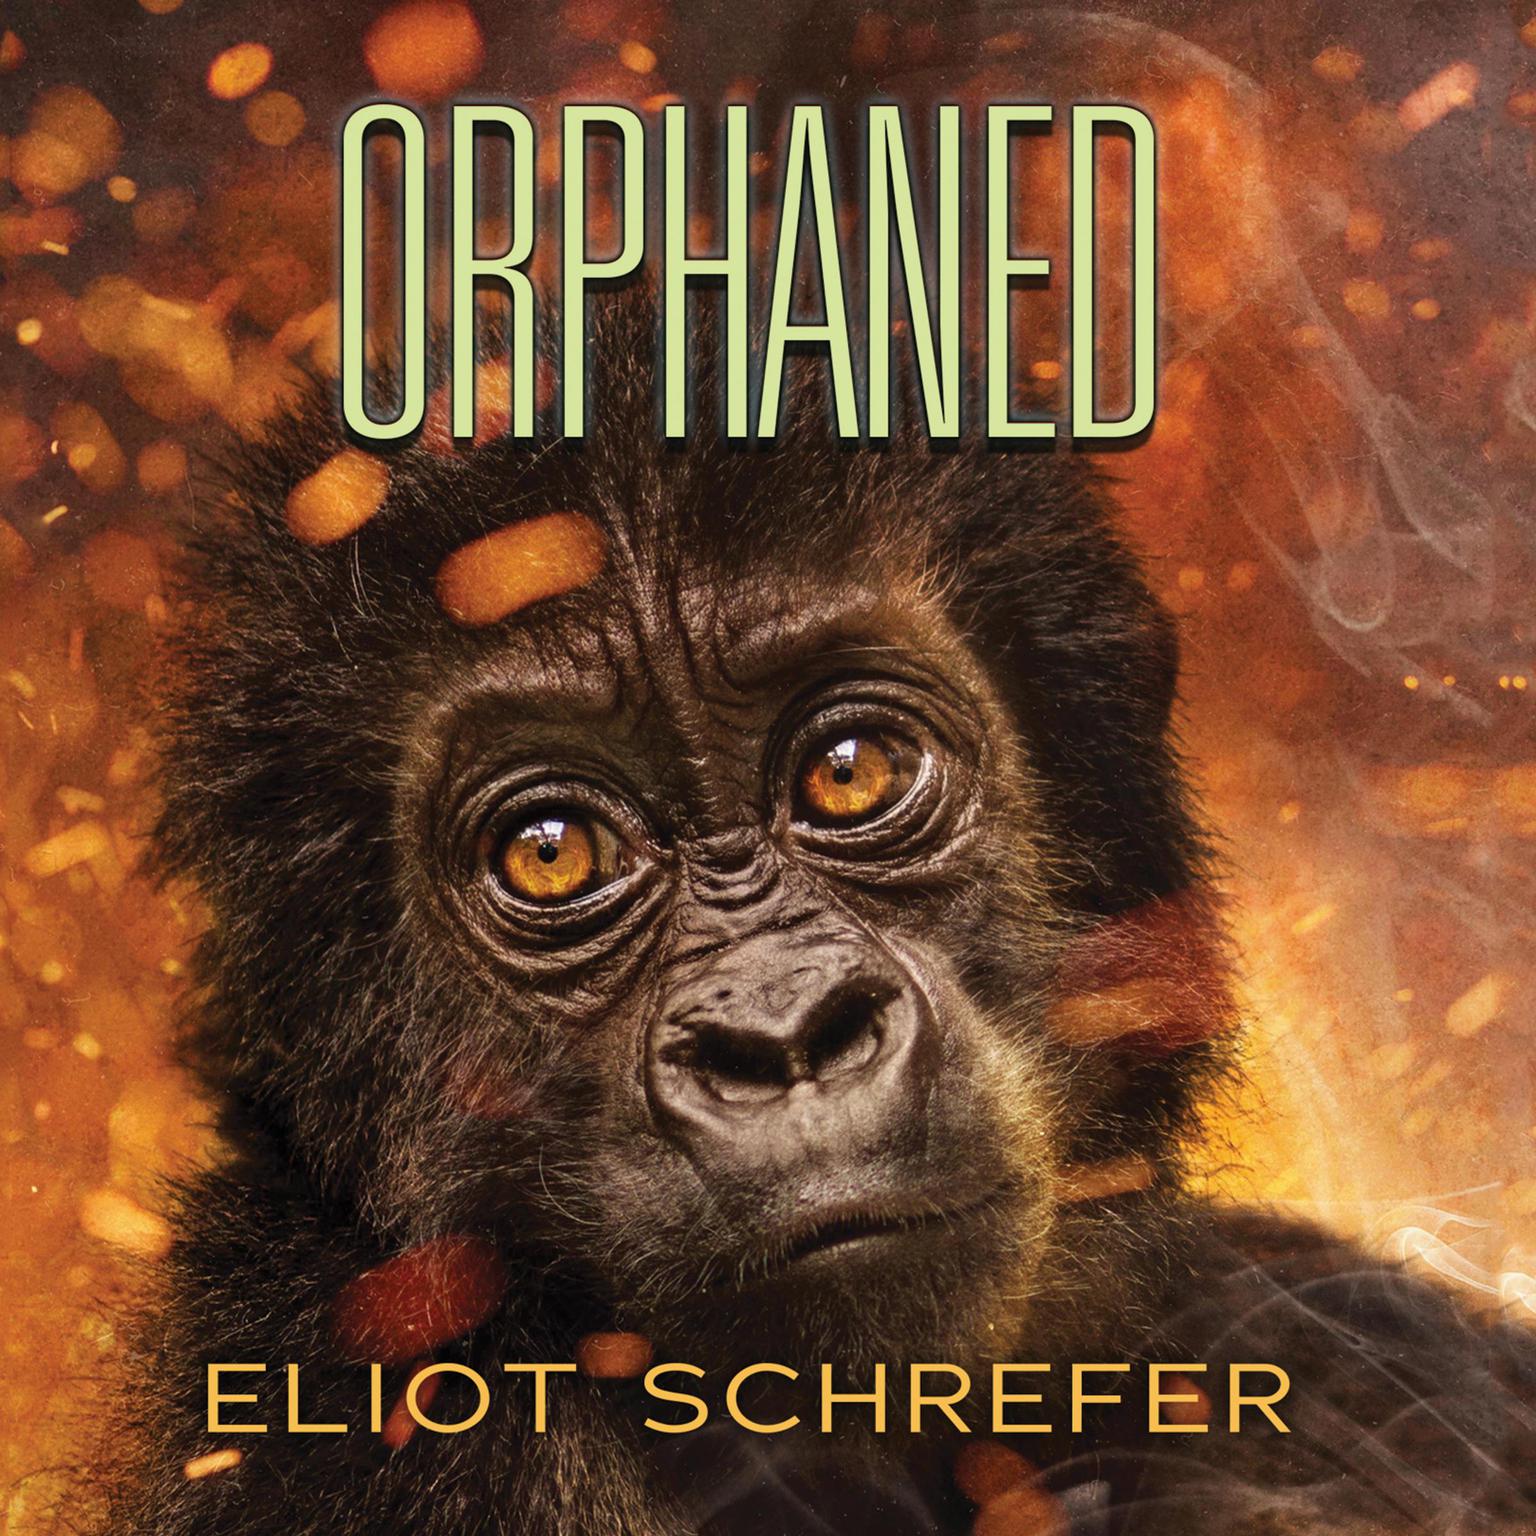 Orphaned Audiobook, by Eliot Schrefer